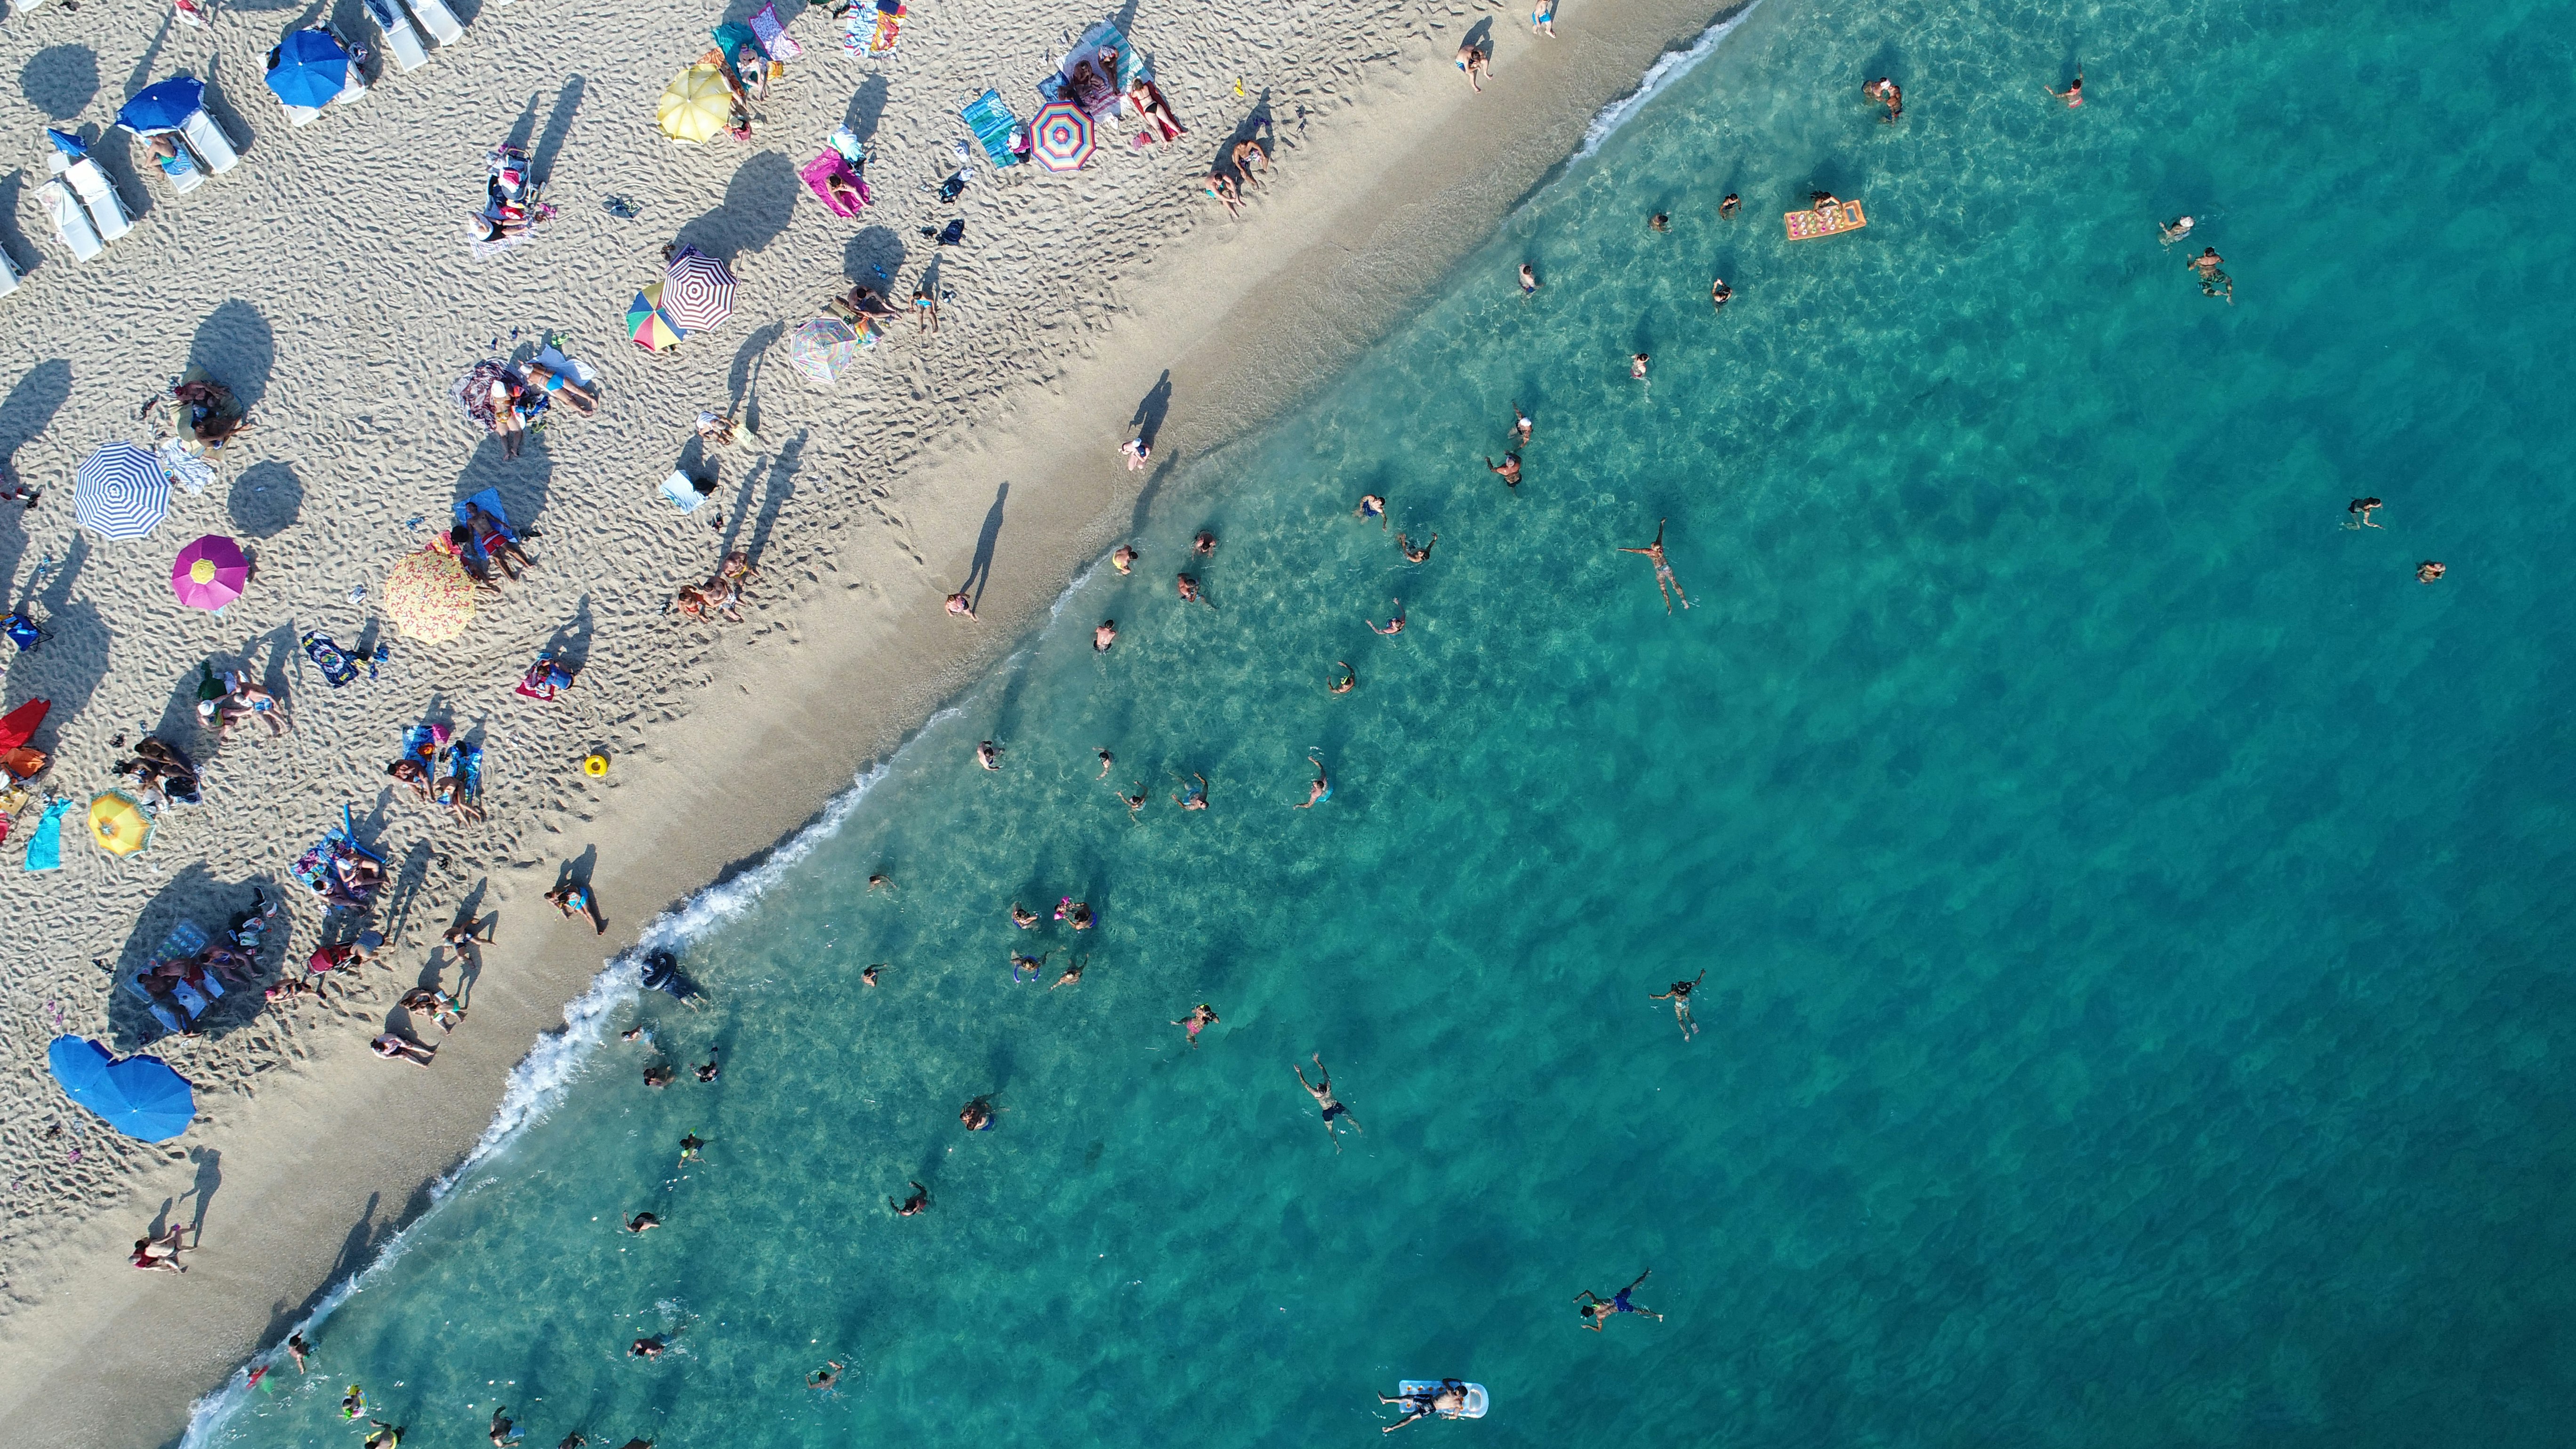 An aerial view of a beach shows colourful umbrellas on the shore and swimmers in the water. 